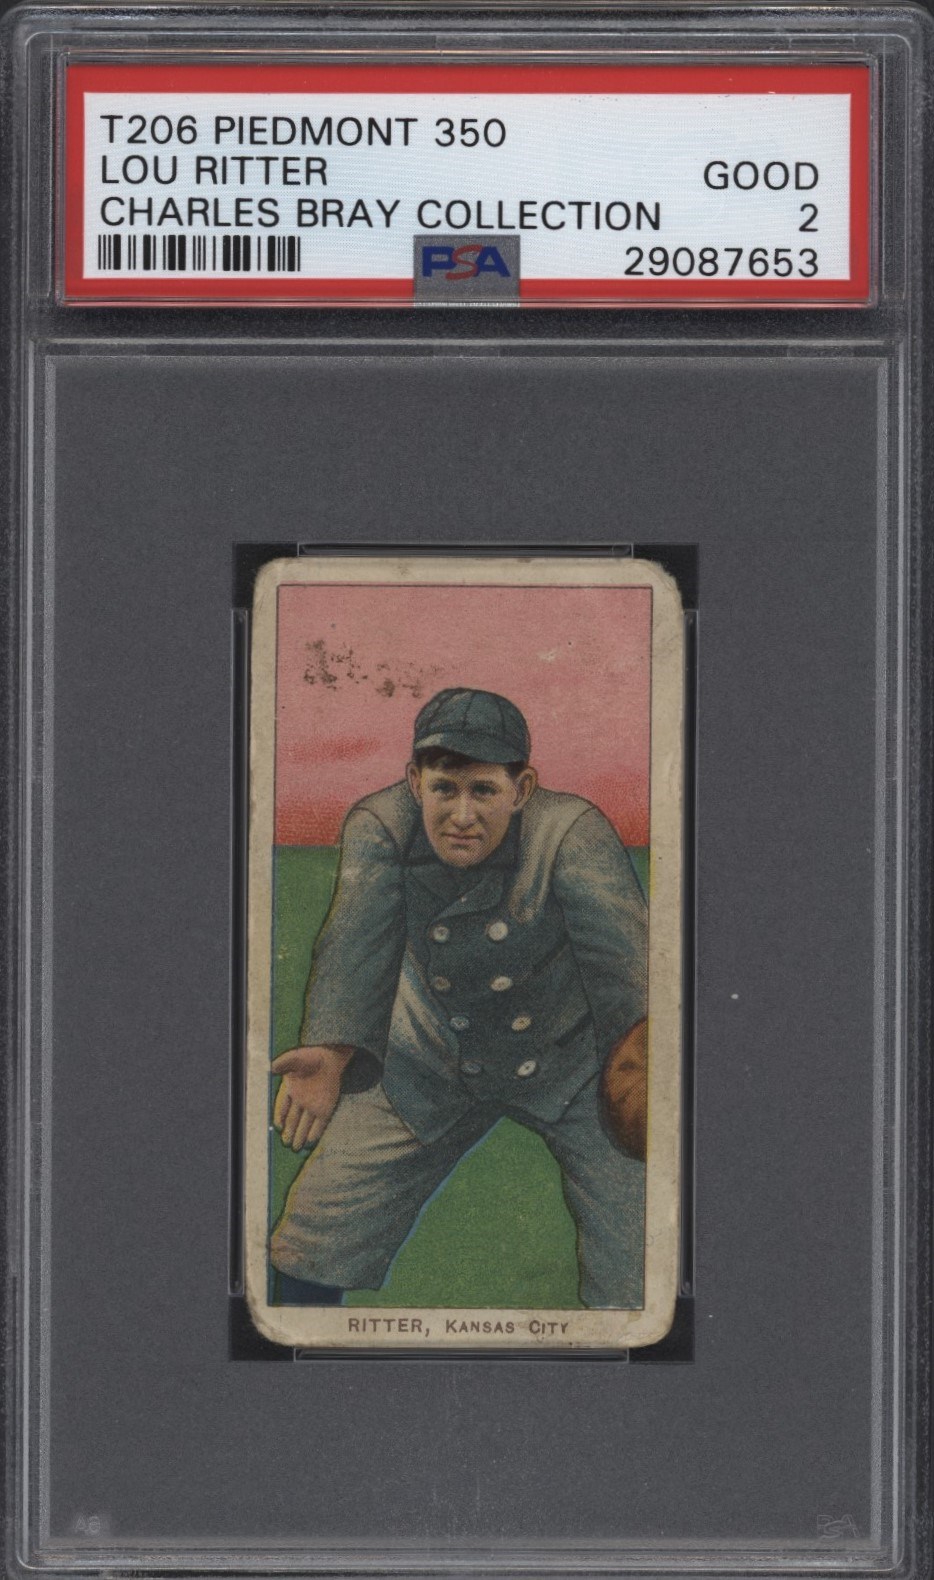 T206 Piedmont 350 Lou Ritter PSA 2 From the Charles Bray Collection